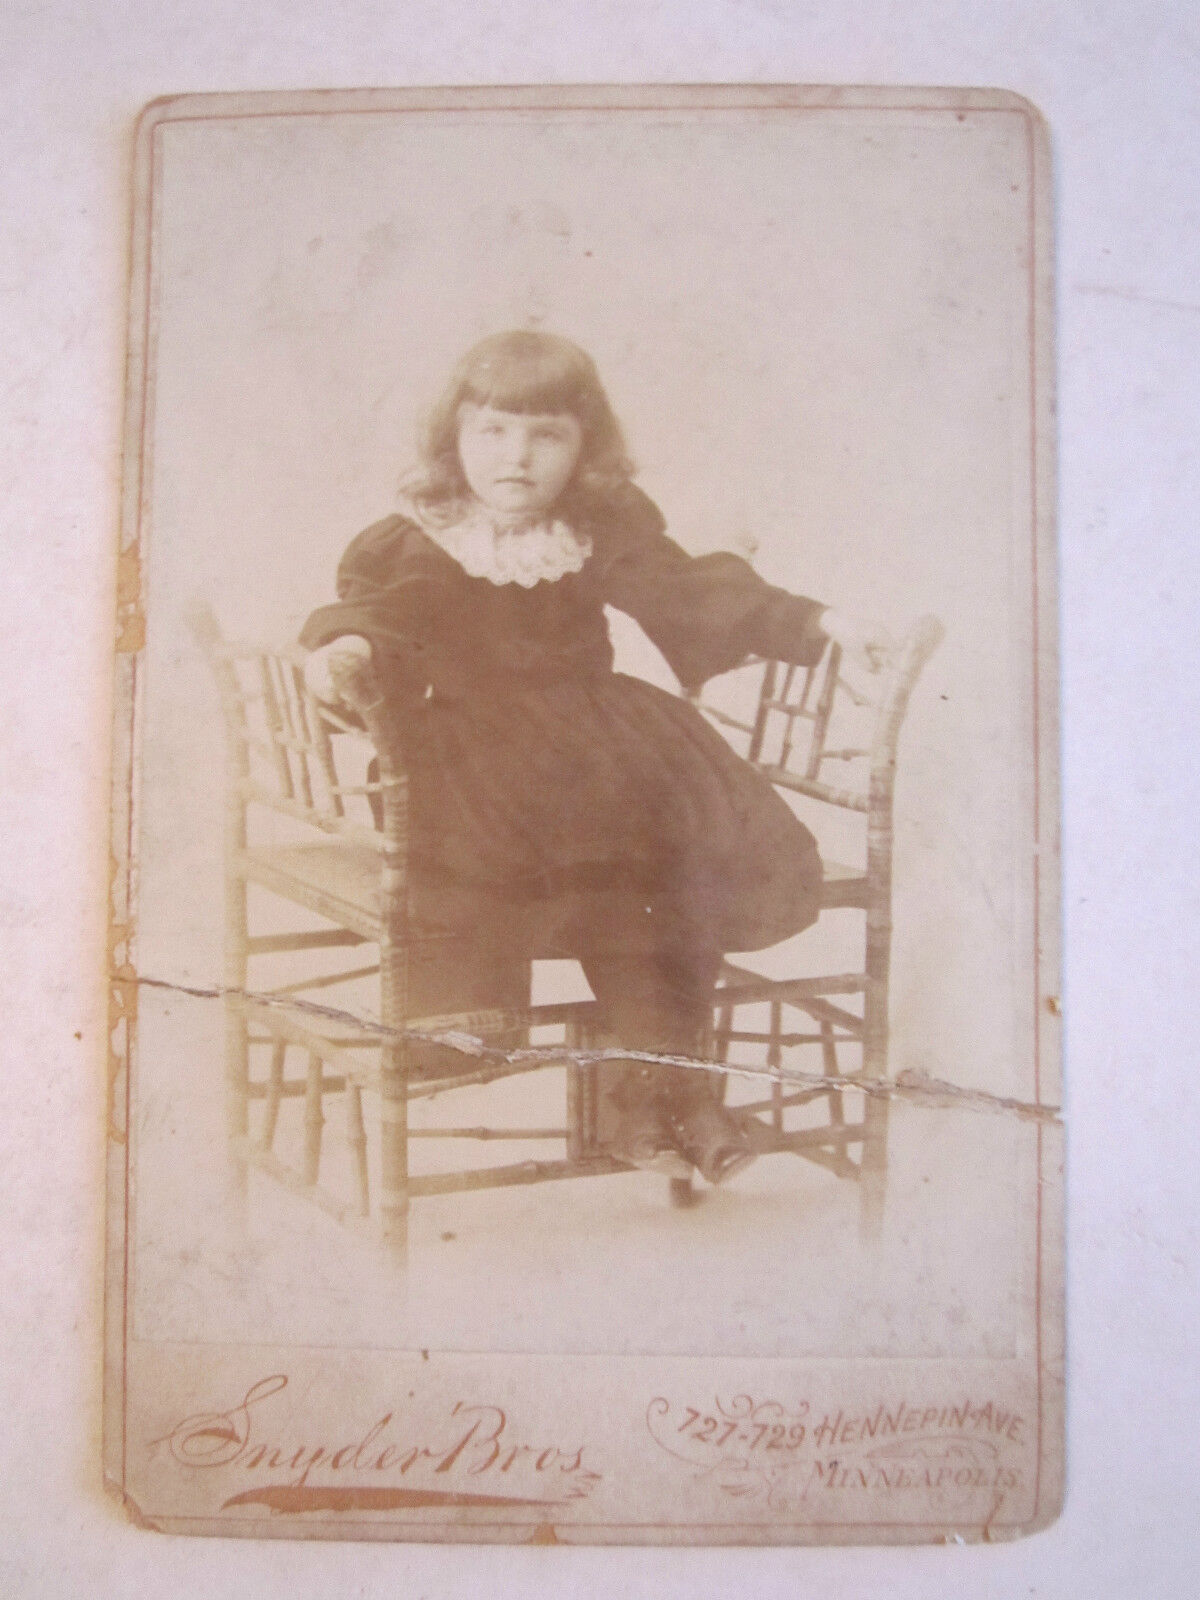 VINTAGE CABINET PHOTO - 1800'S- GIRL PHOTO - SYNDER BROS PHOTOGRAPHER -TUB MM